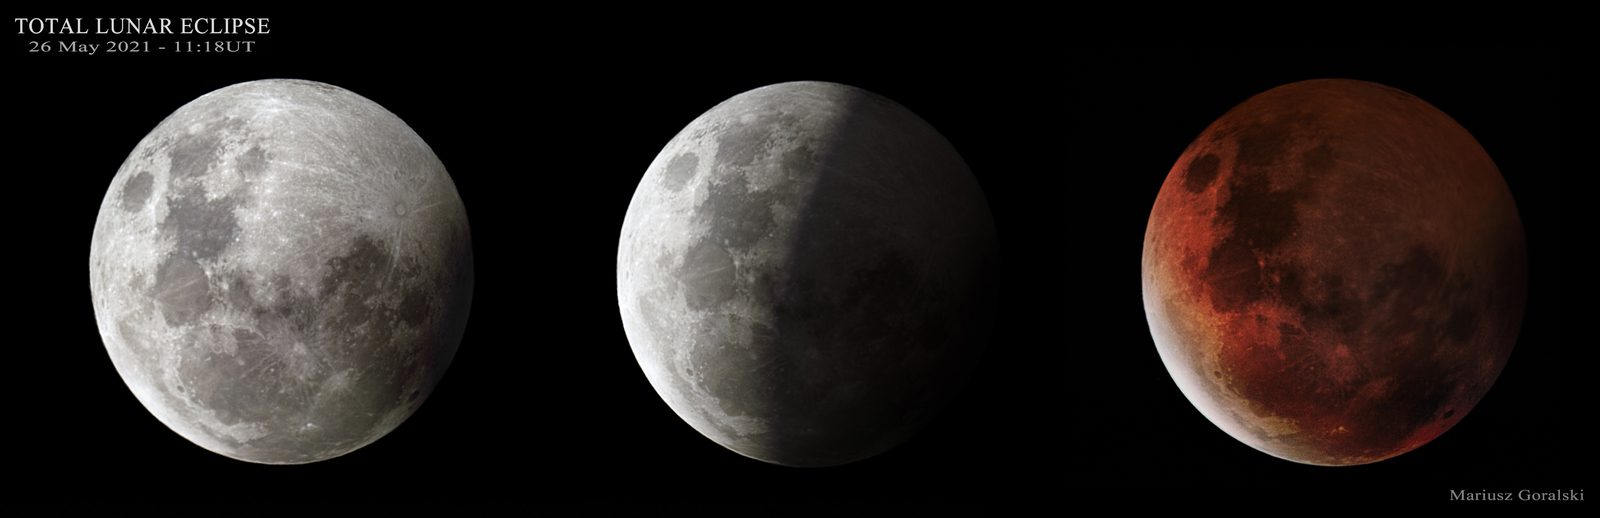 Lunar Eclipse of 26 May 2021 @ 1118UT